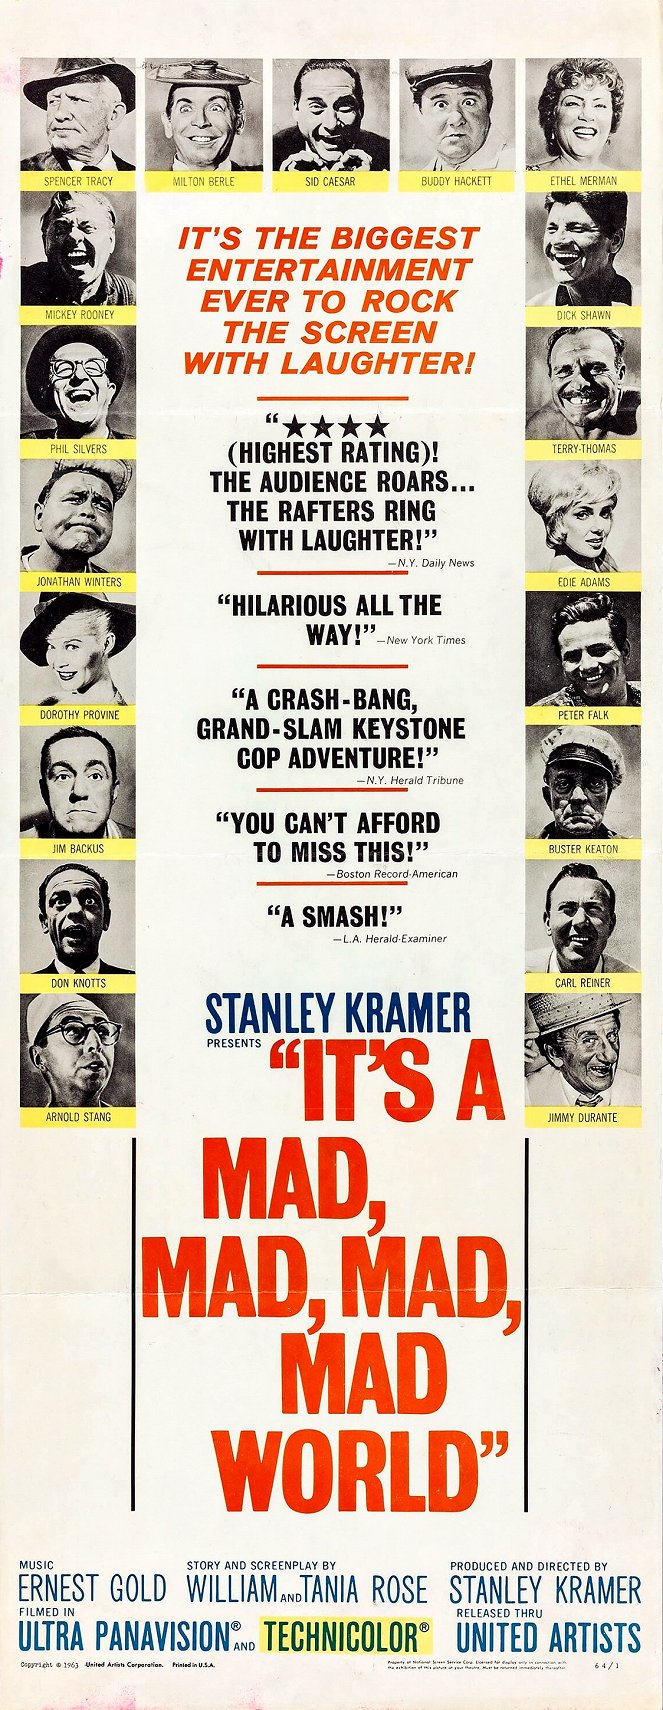 It's a Mad, Mad, Mad, Mad World - Posters